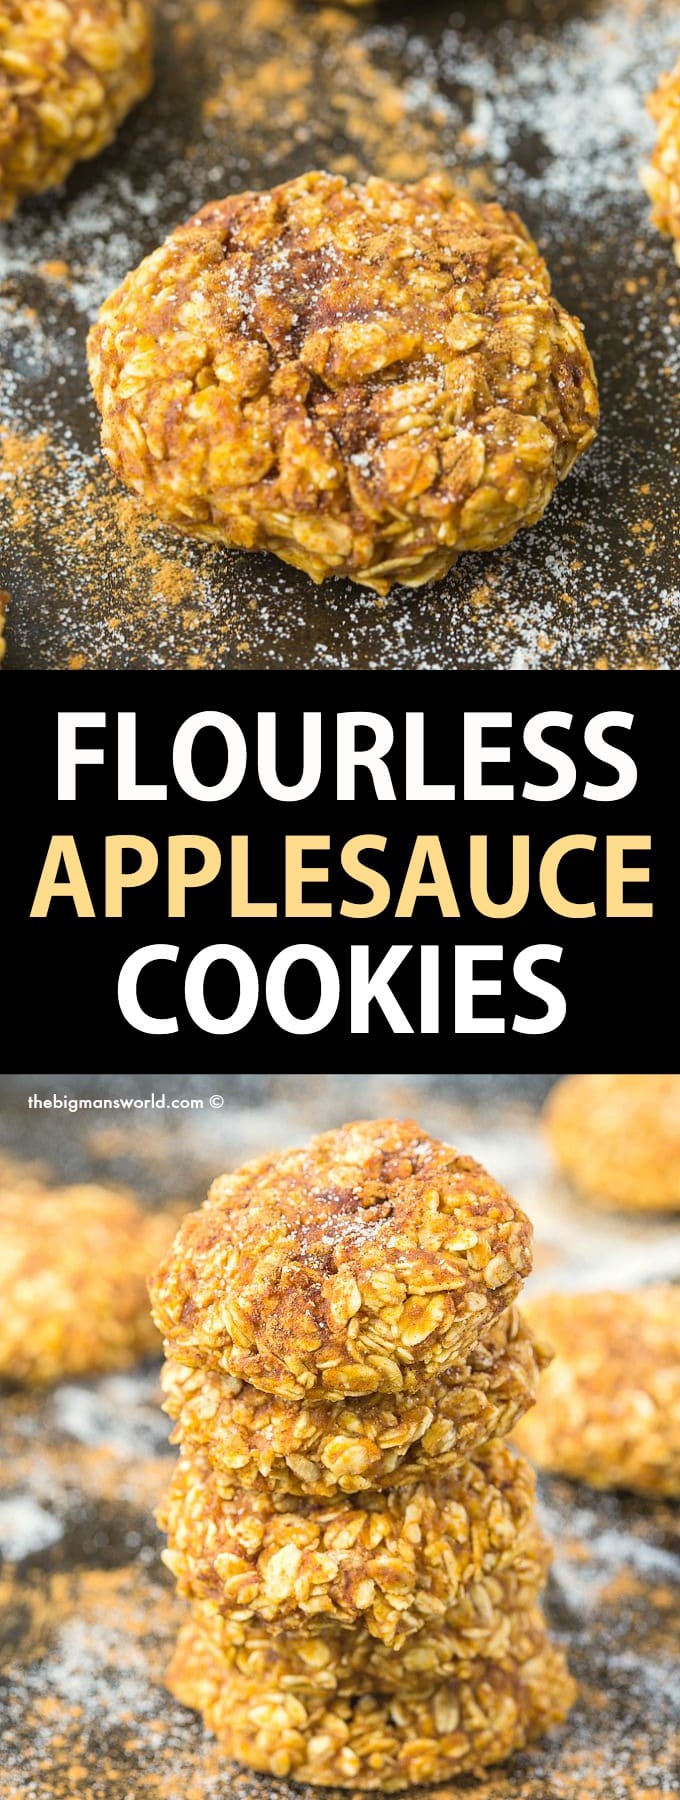 applesauce cookies with oatmeal